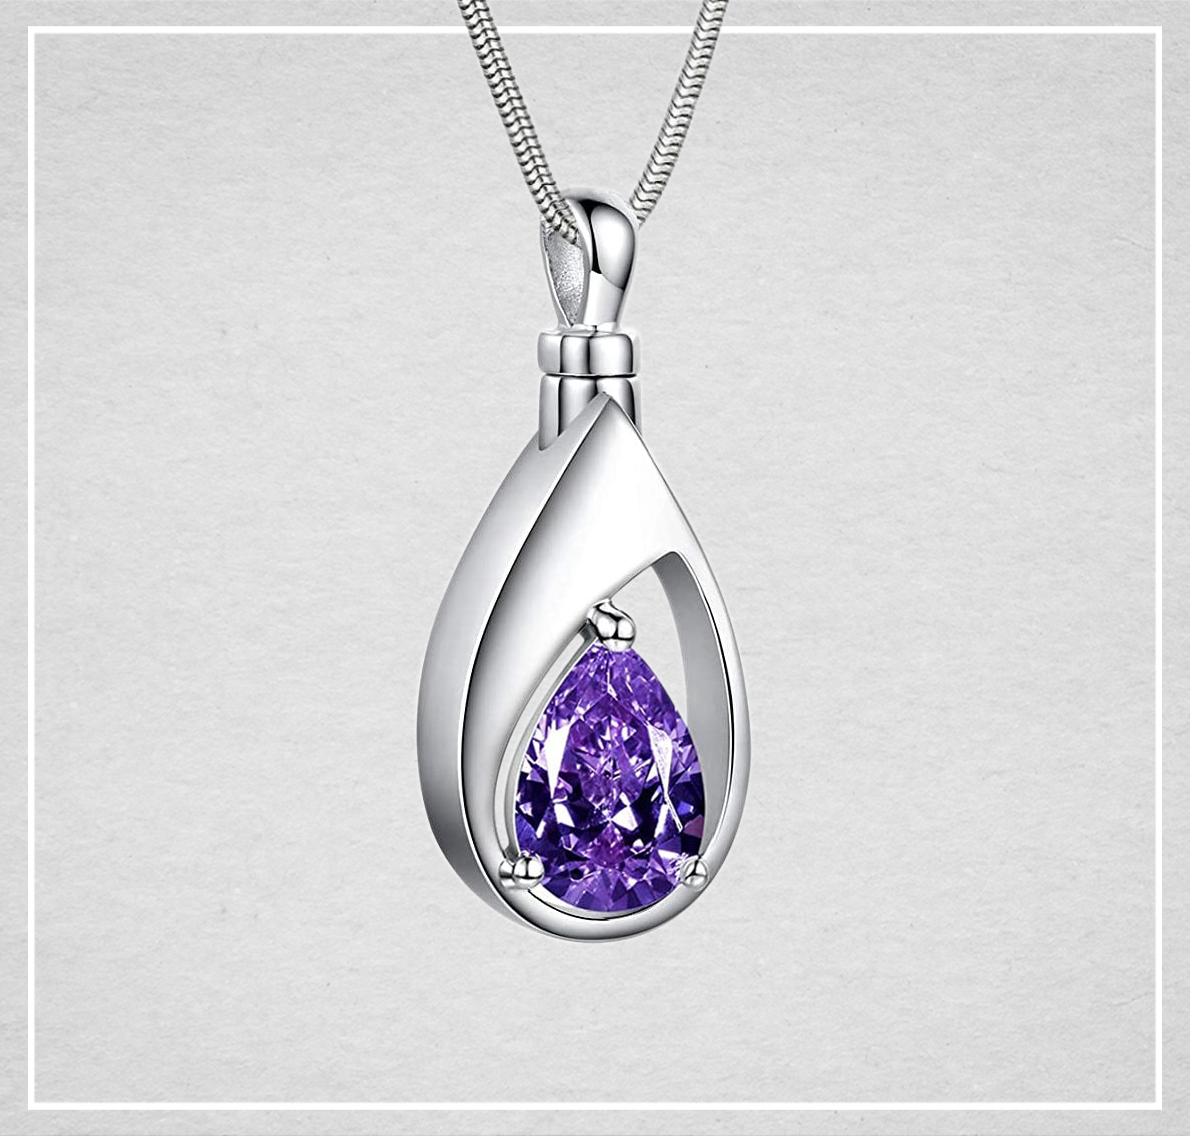 Teardrop Cremation Jewelry- February - Heartland Cremation & Burial Society